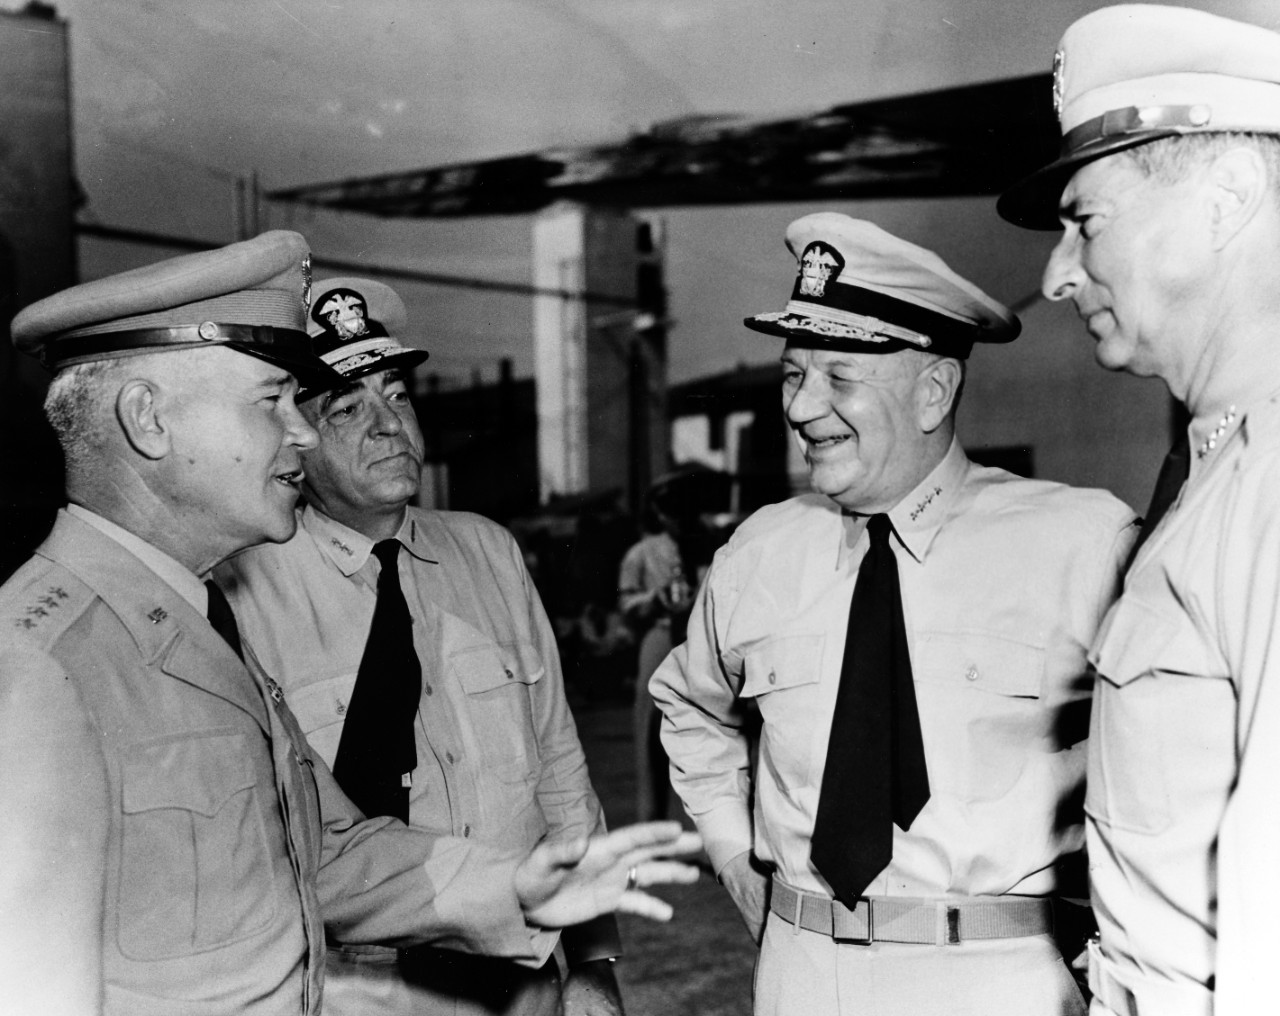 Photo #: 80-G-445182  Senior U.S. Army and Navy Officers